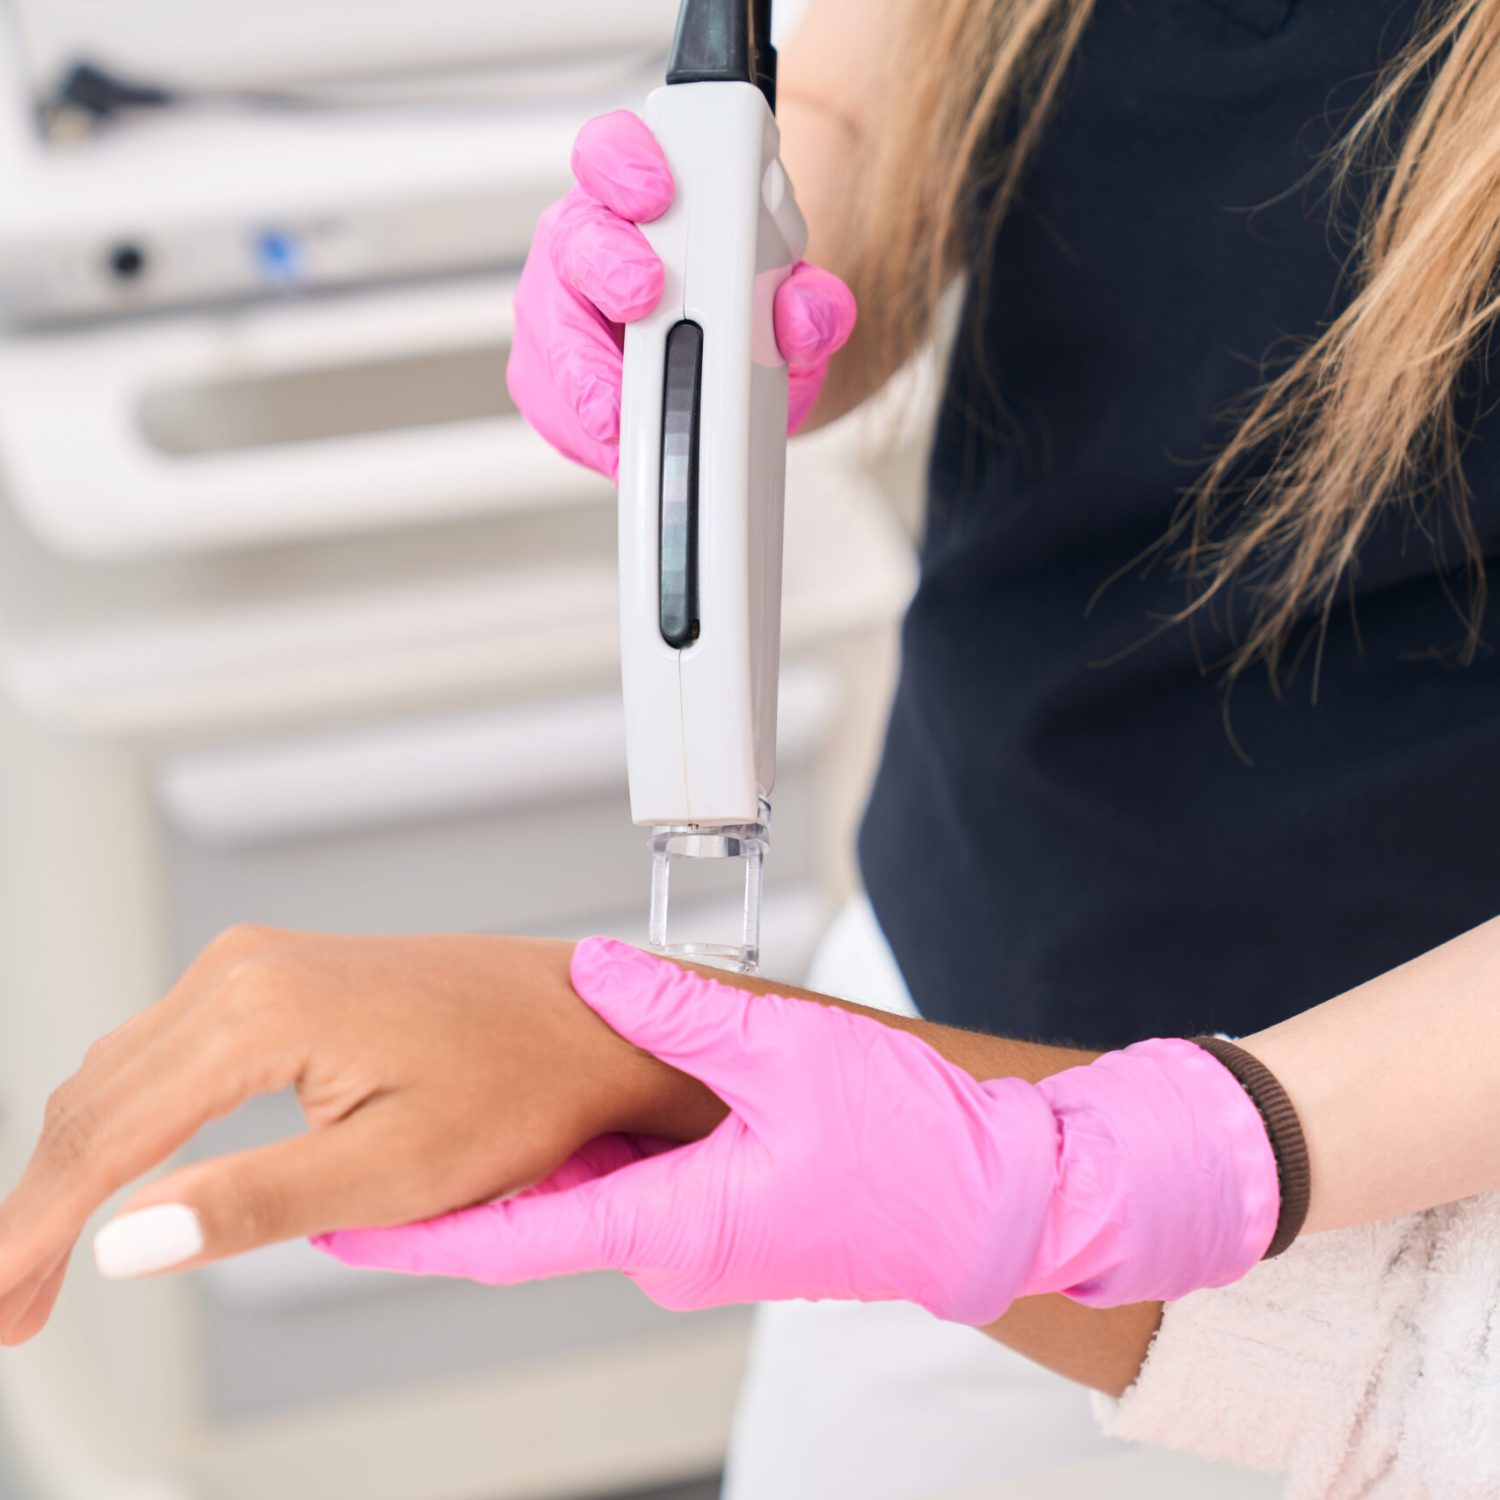 Highly effective, painless procedure for laser hair removal of the hands in a modern aesthetic medicine center